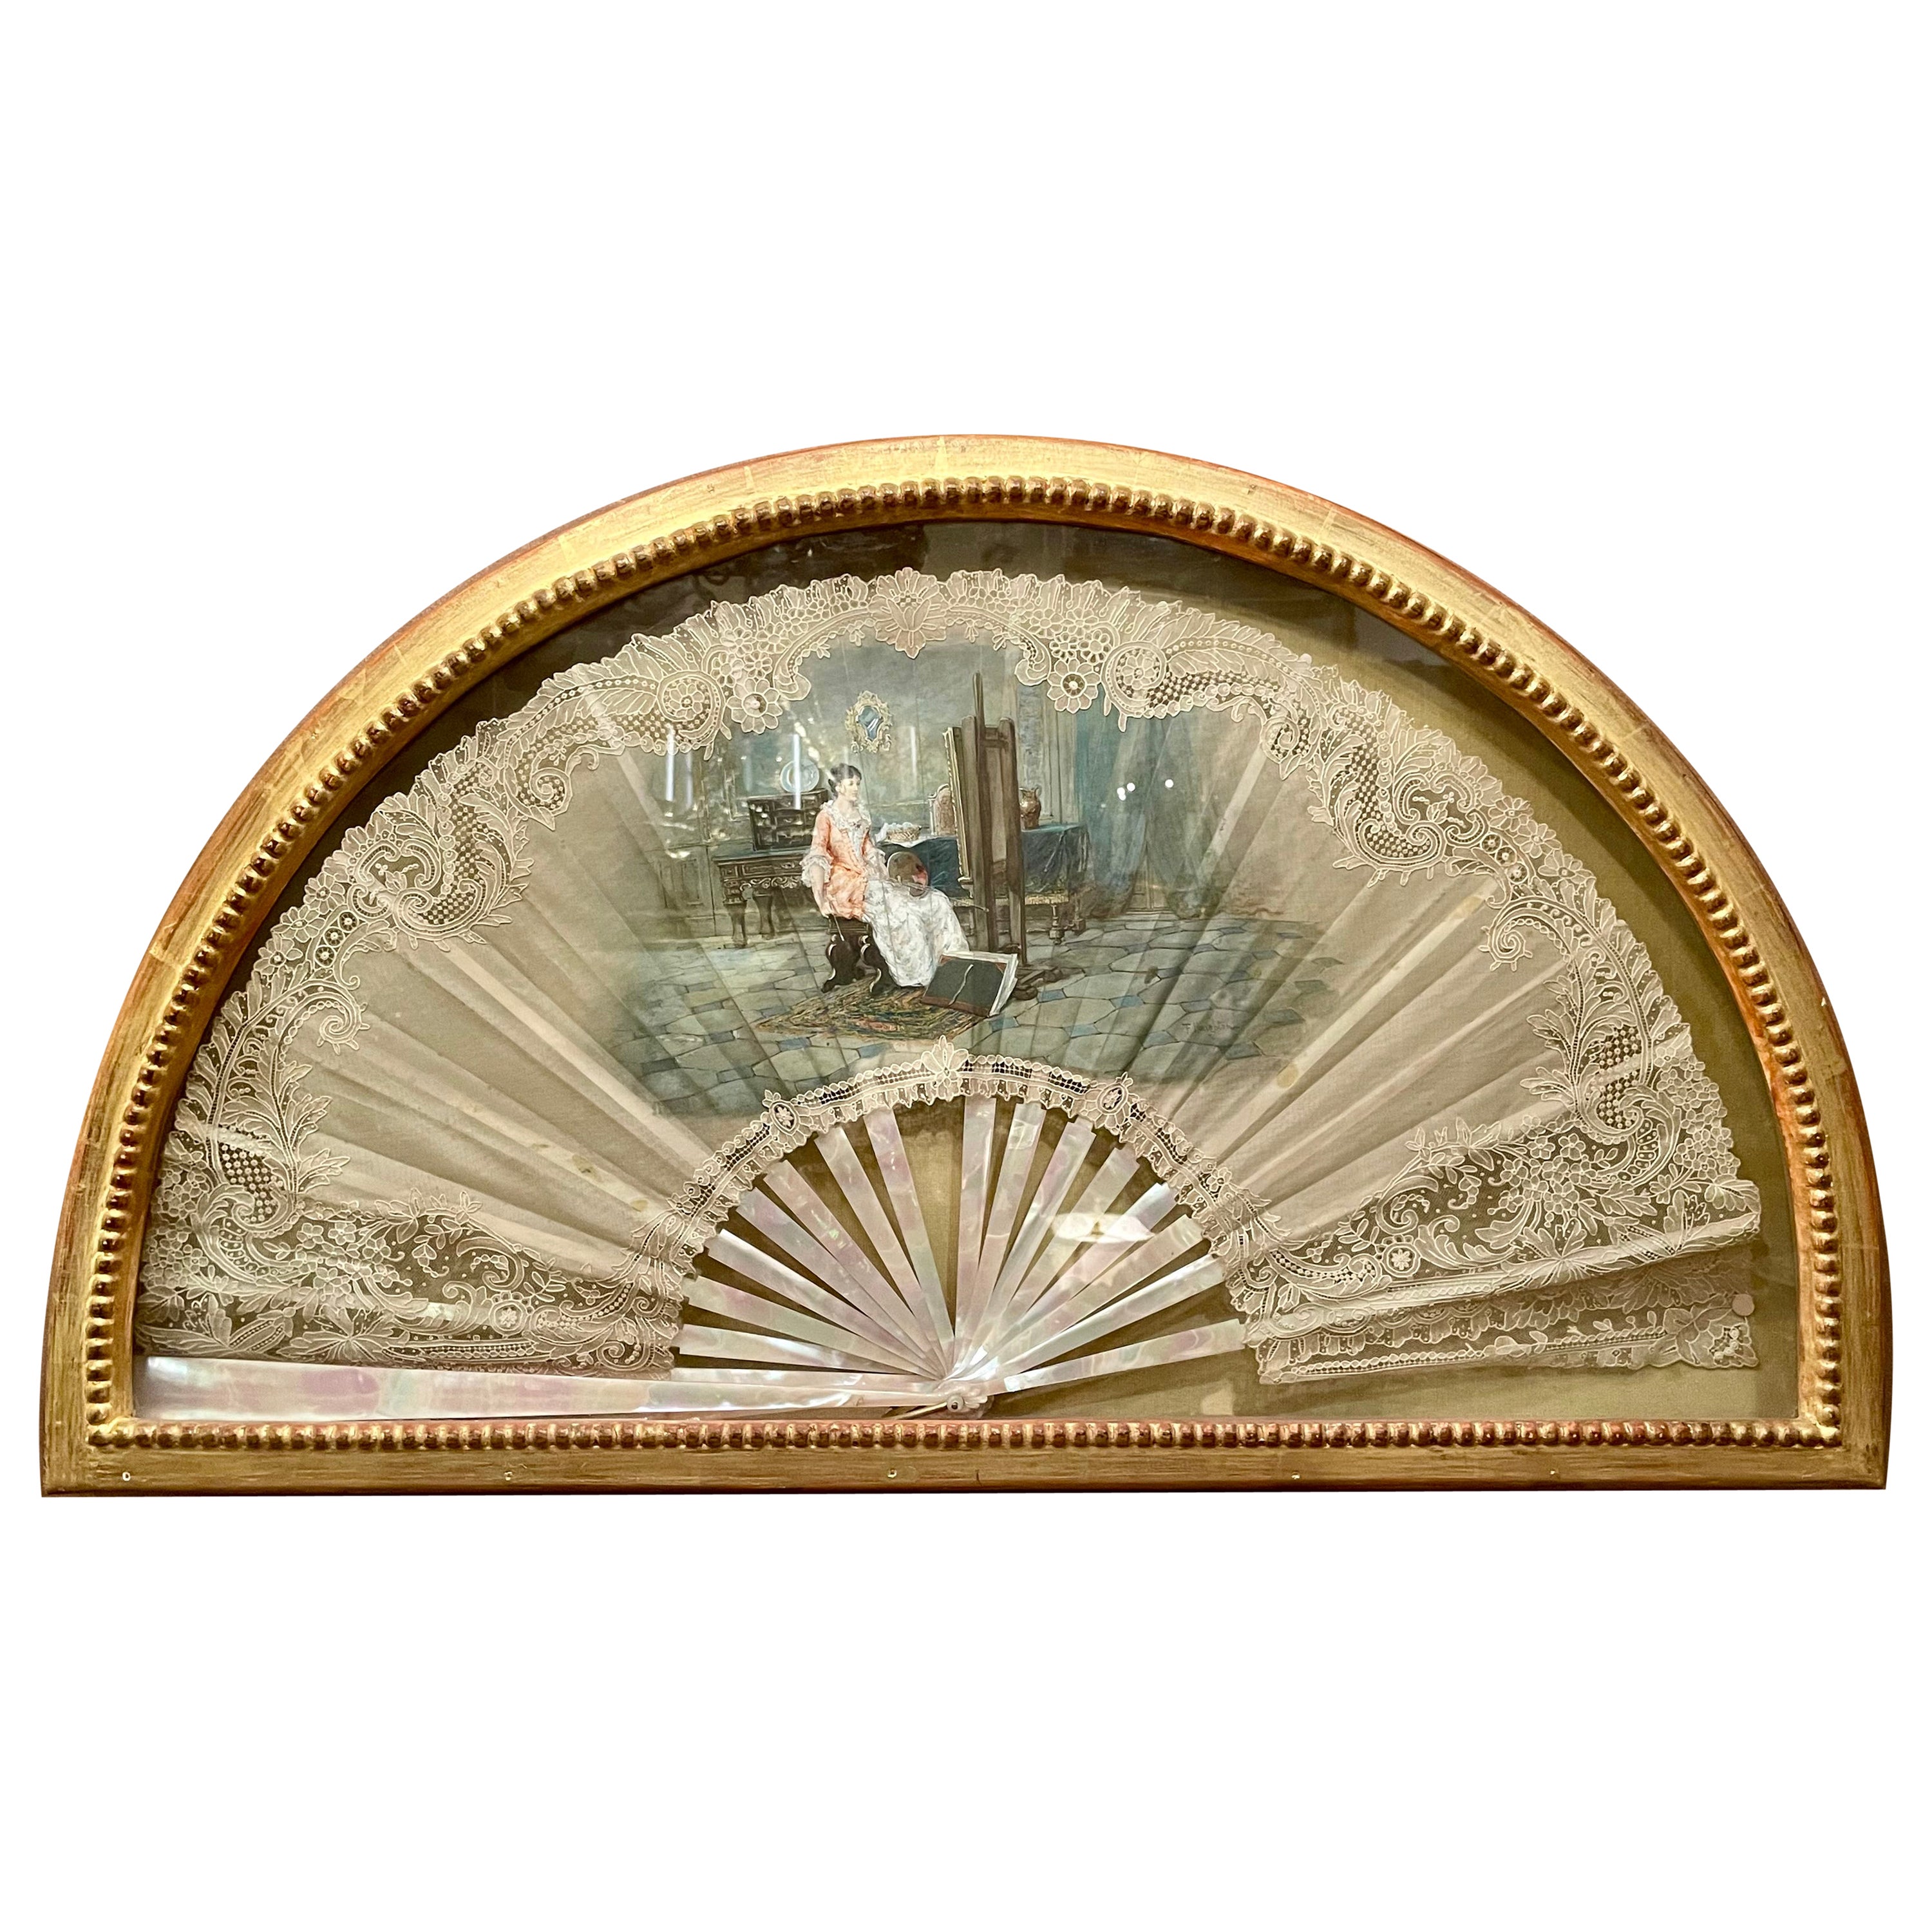 Antique Hand-Painted Mother-of-Pearl Fan Screen Shadow Box, Circa 1840.